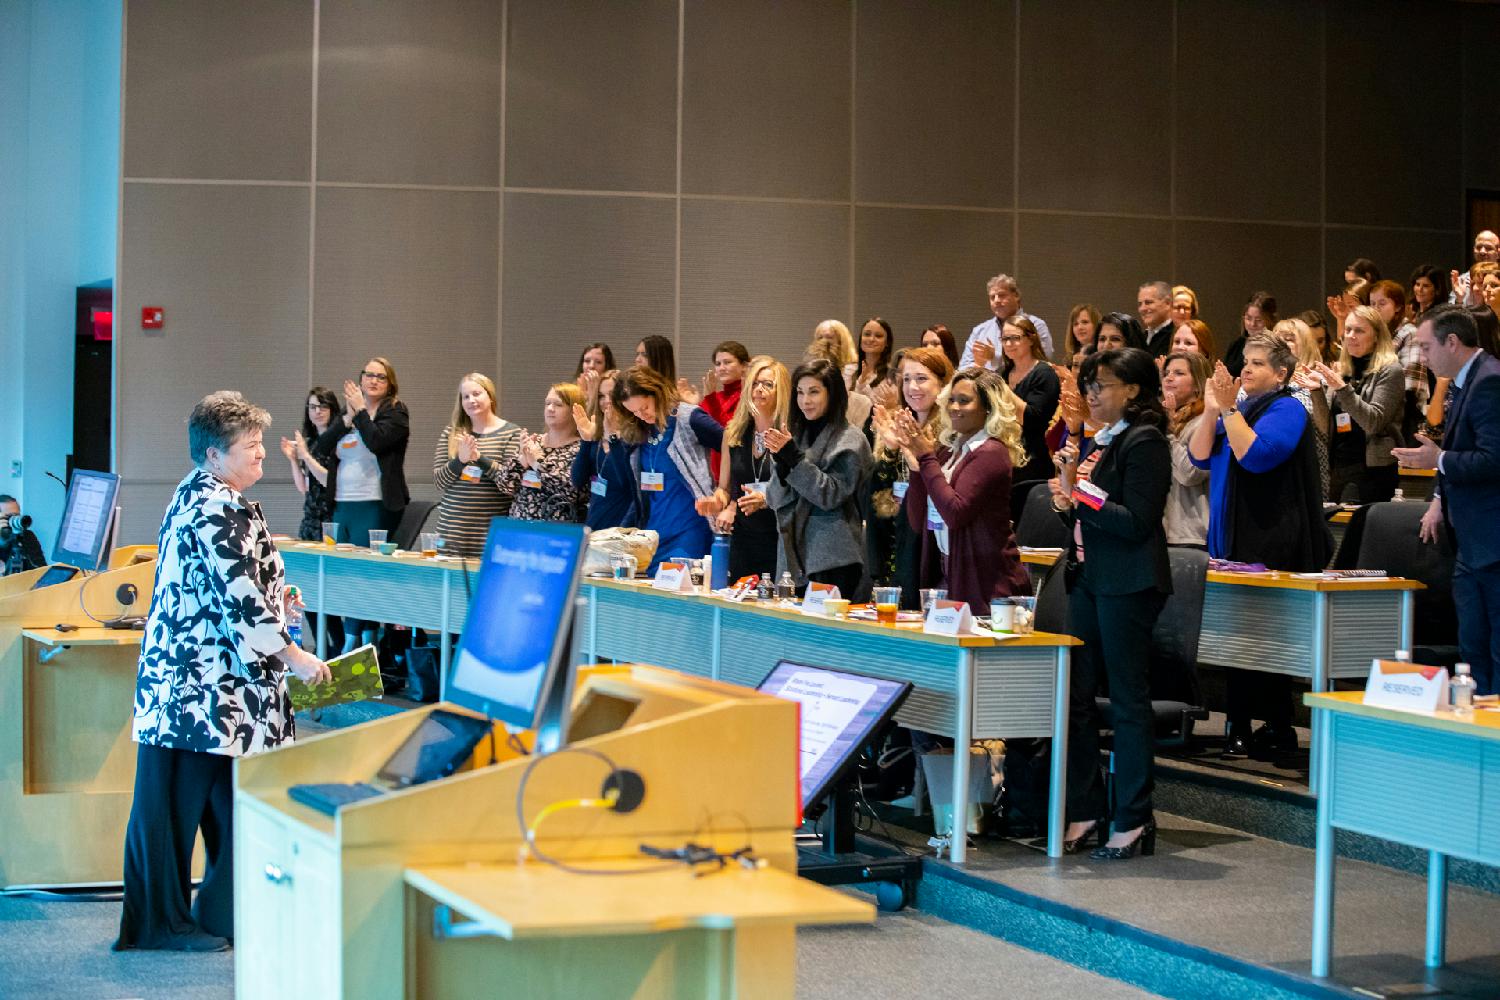 SEI employee Rhonda Cook receives a standing ovation from fellow employees after sharing #HerStory at SEI Women's Network Annual Leadership Summit. 